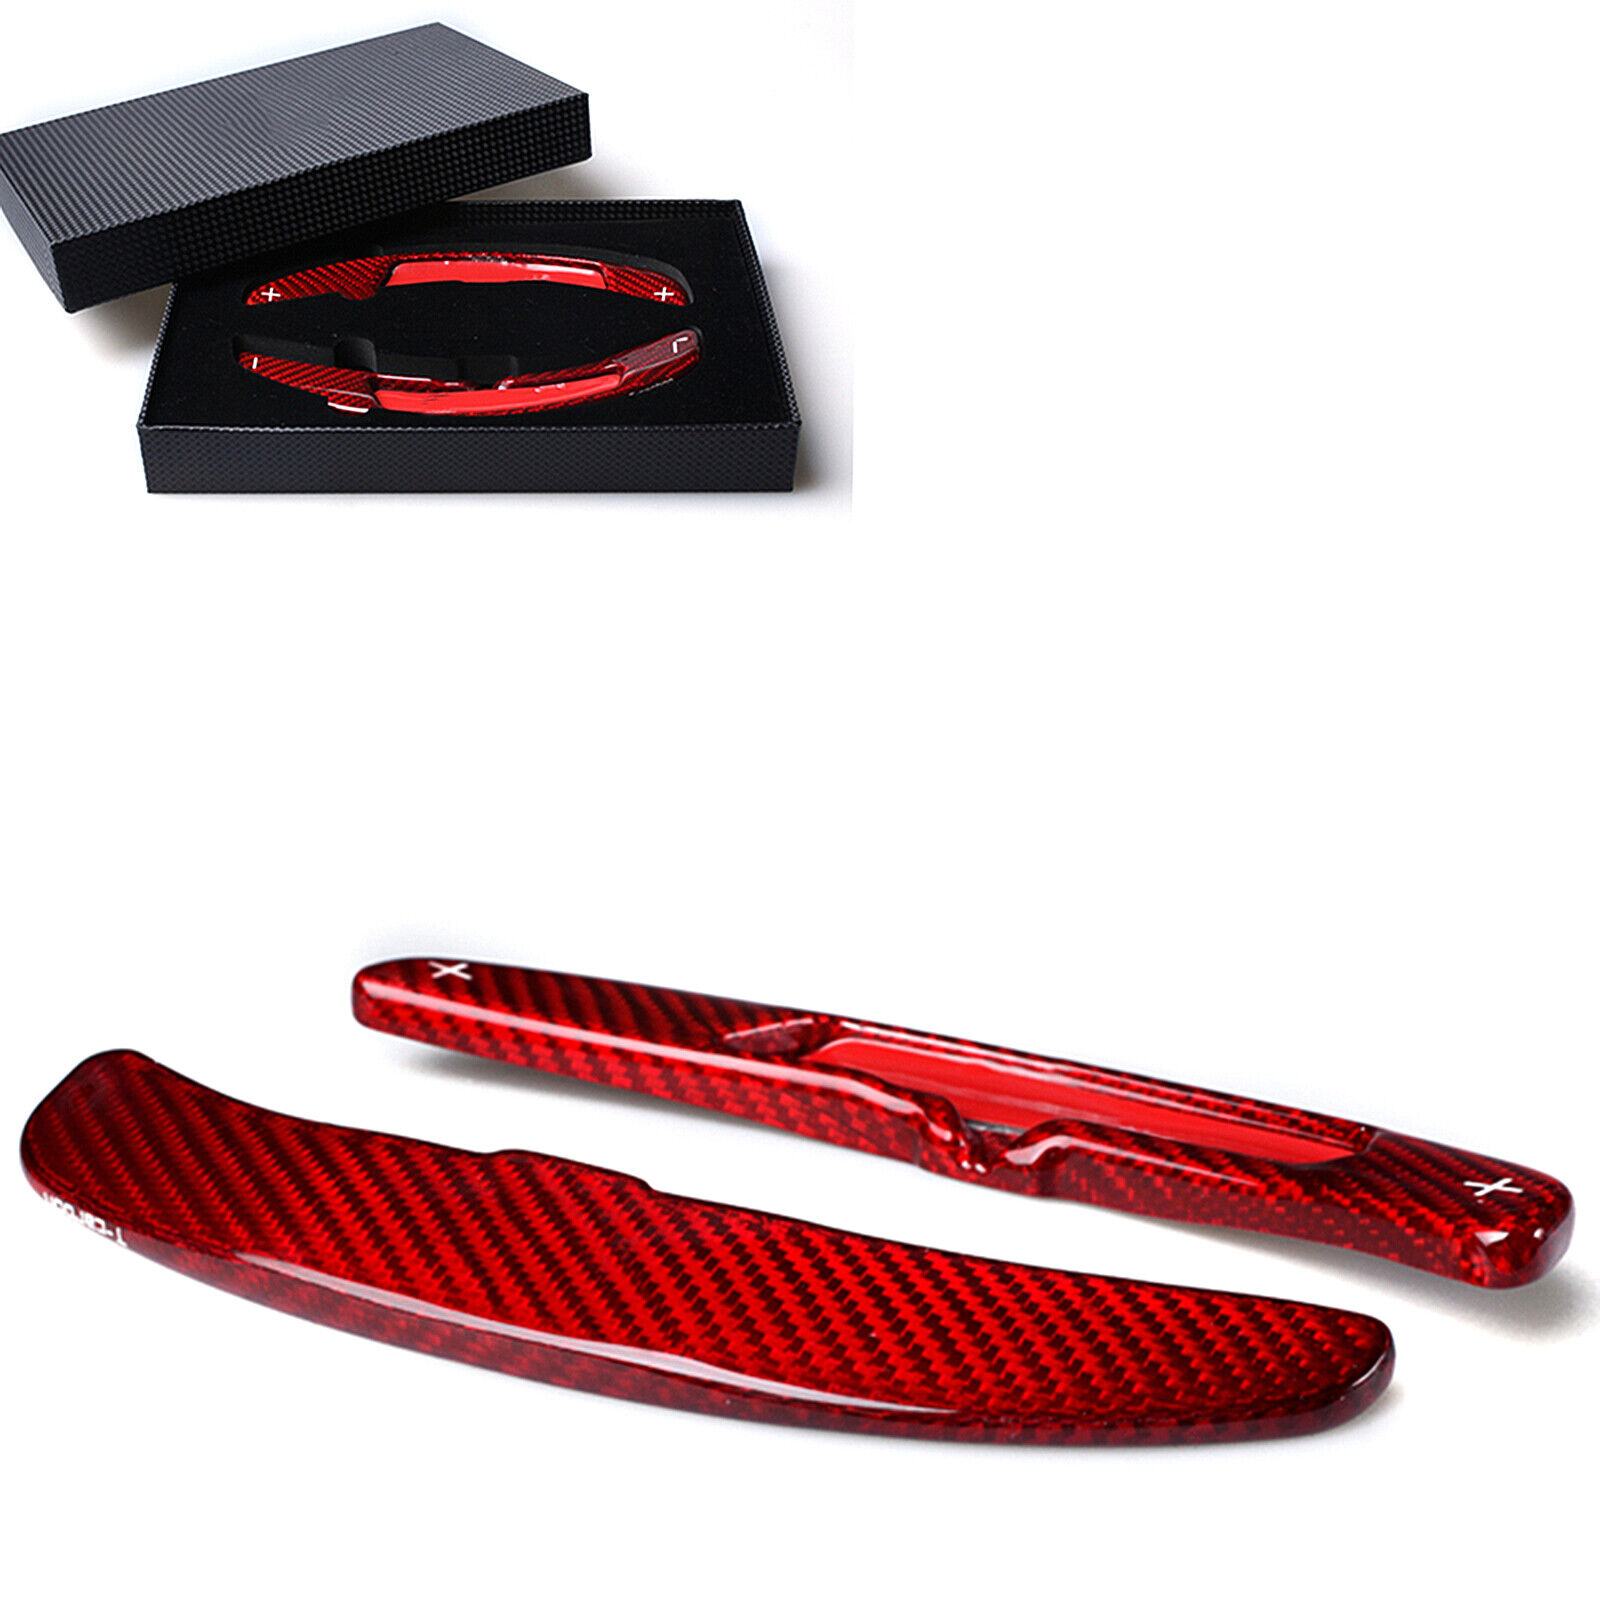 Red Carbon Steering Wheel Shifter Paddle Extension For Porsche 911 918 Spyder